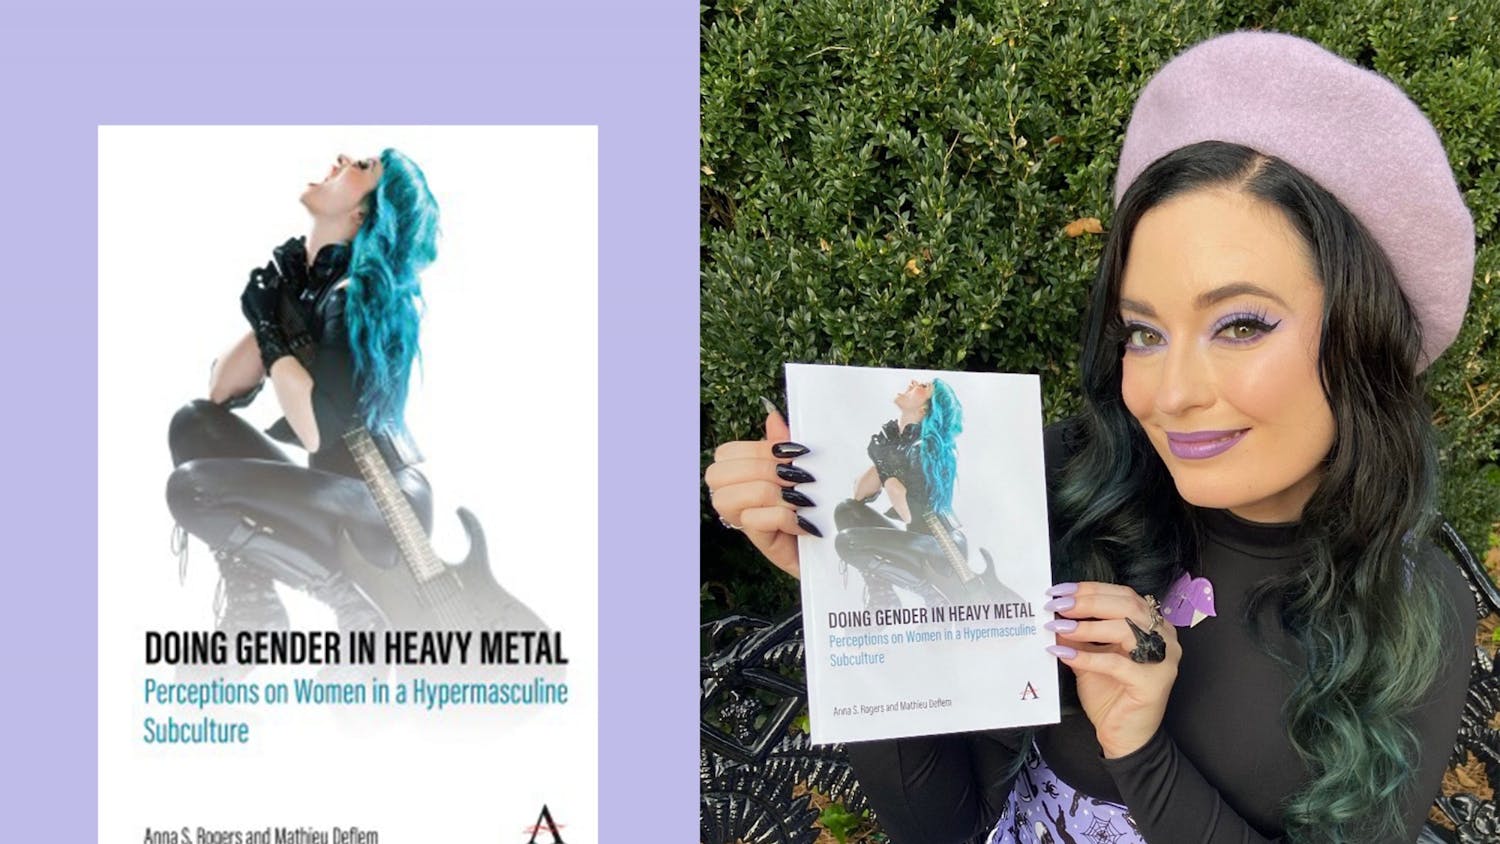 Anna Rogers, PhD, a USC alum, pictured with a book she wrote with USC professor Mathieu Deflem, titled “Doing Gender in Heavy Metal: Perceptions on Women in a Hypermasculine Subculture.”